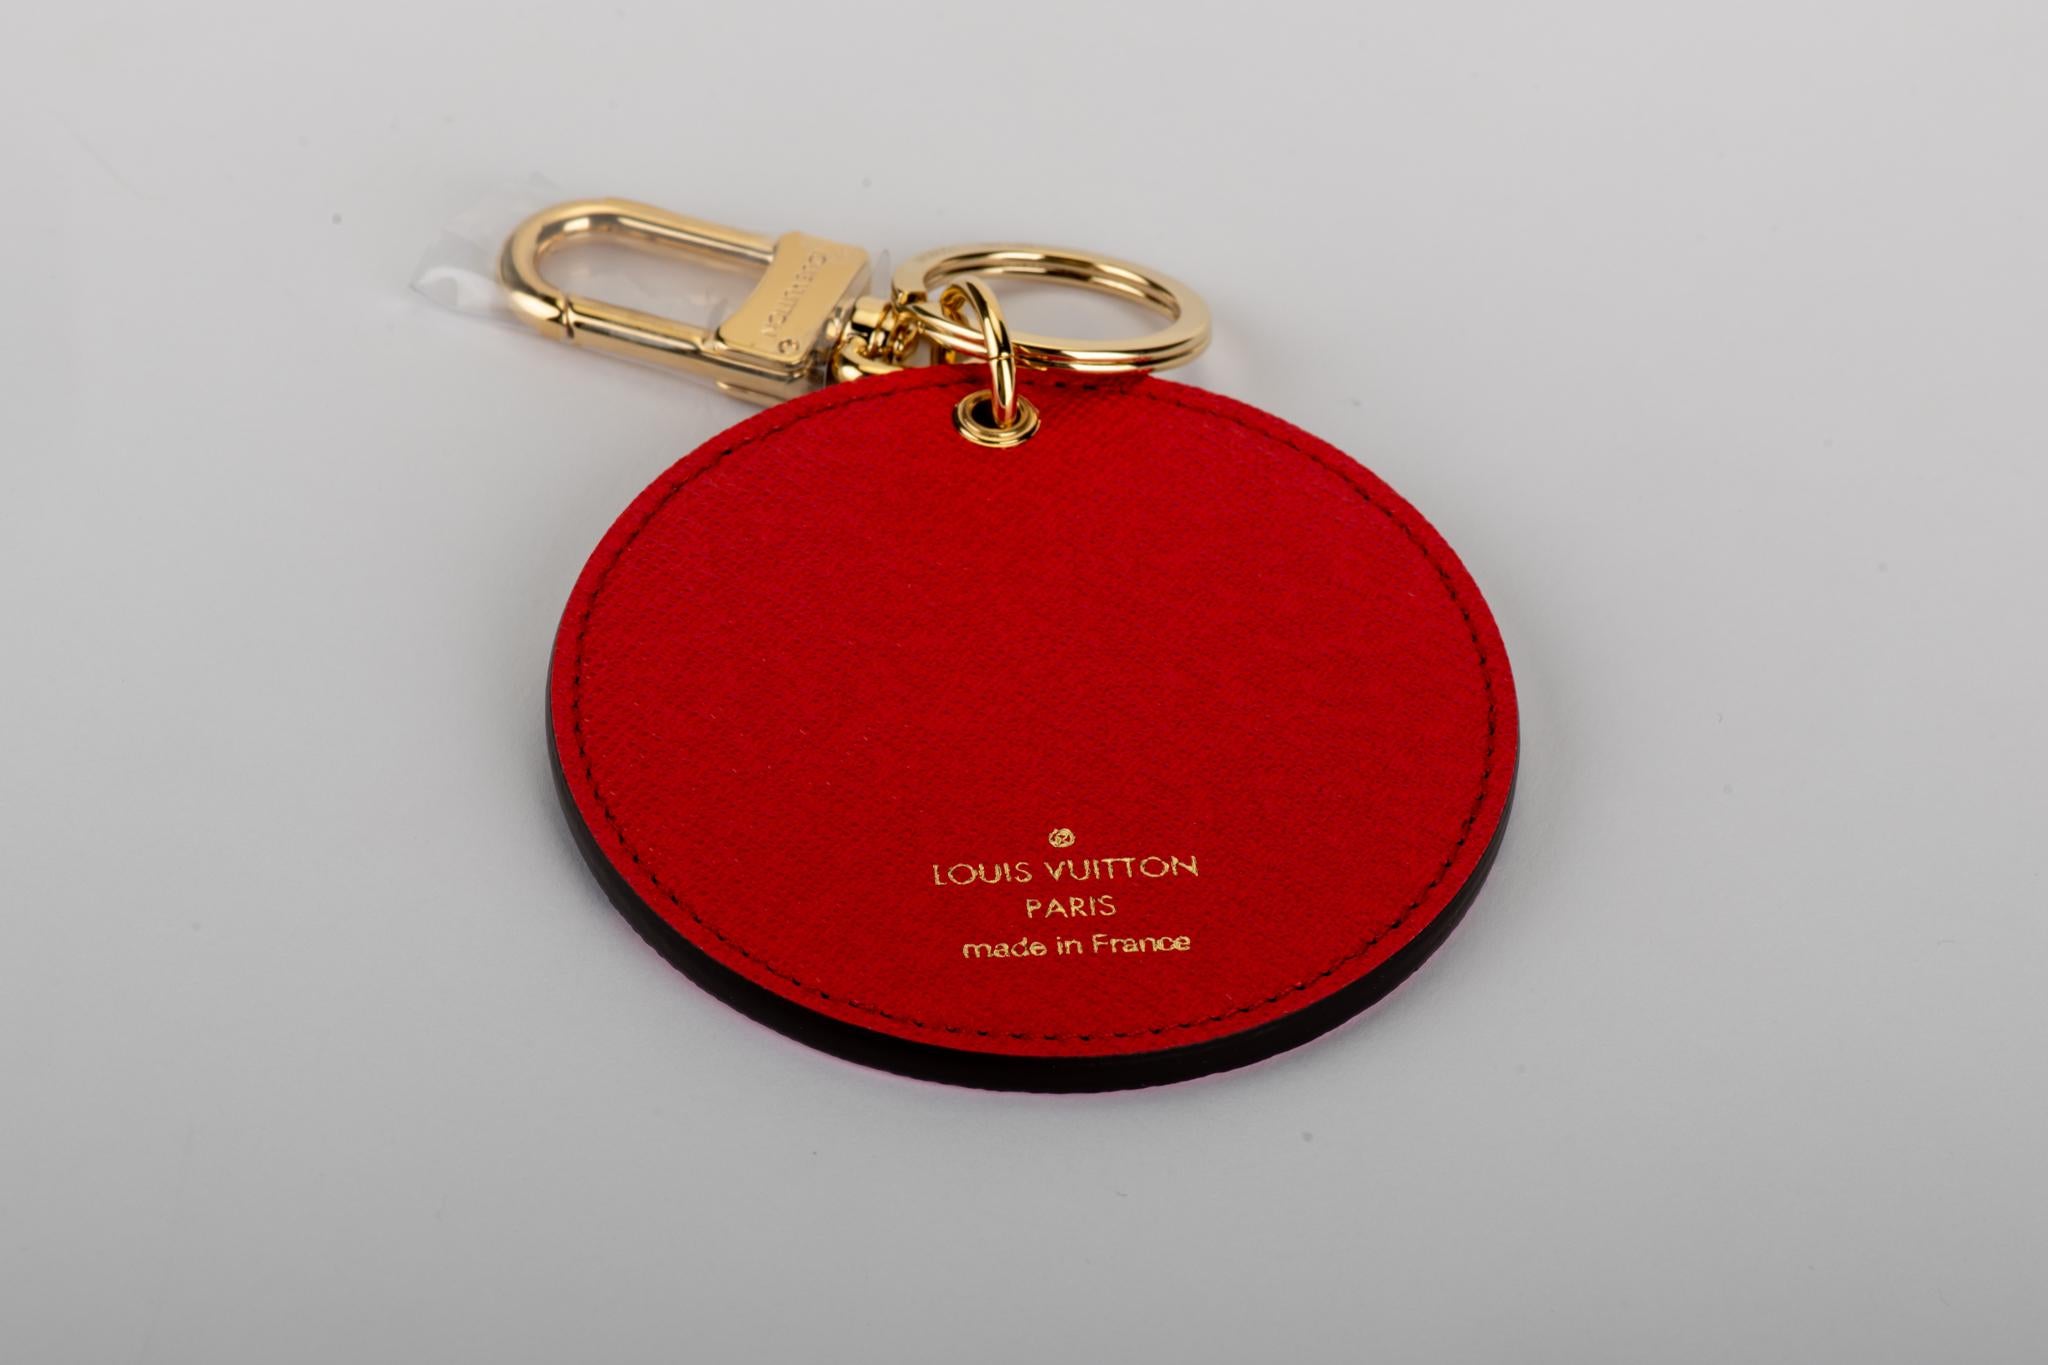 Louis Vuitton Christmas 2019 limited edition Paris keychain/bag charm. Comes with original dust cover and box.